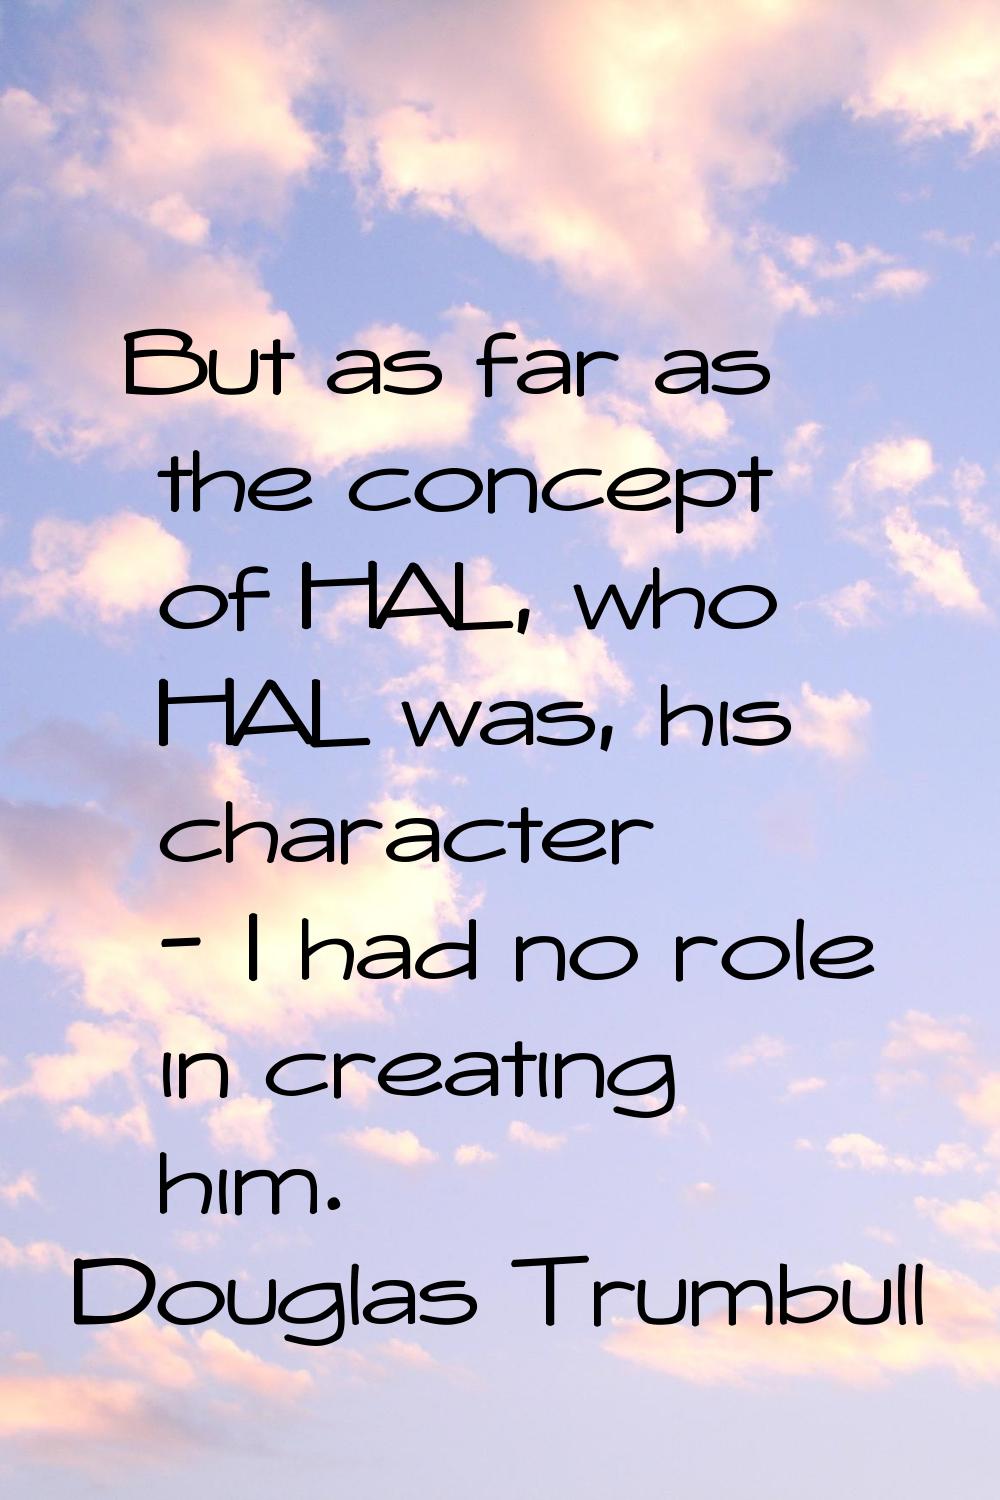 But as far as the concept of HAL, who HAL was, his character - I had no role in creating him.